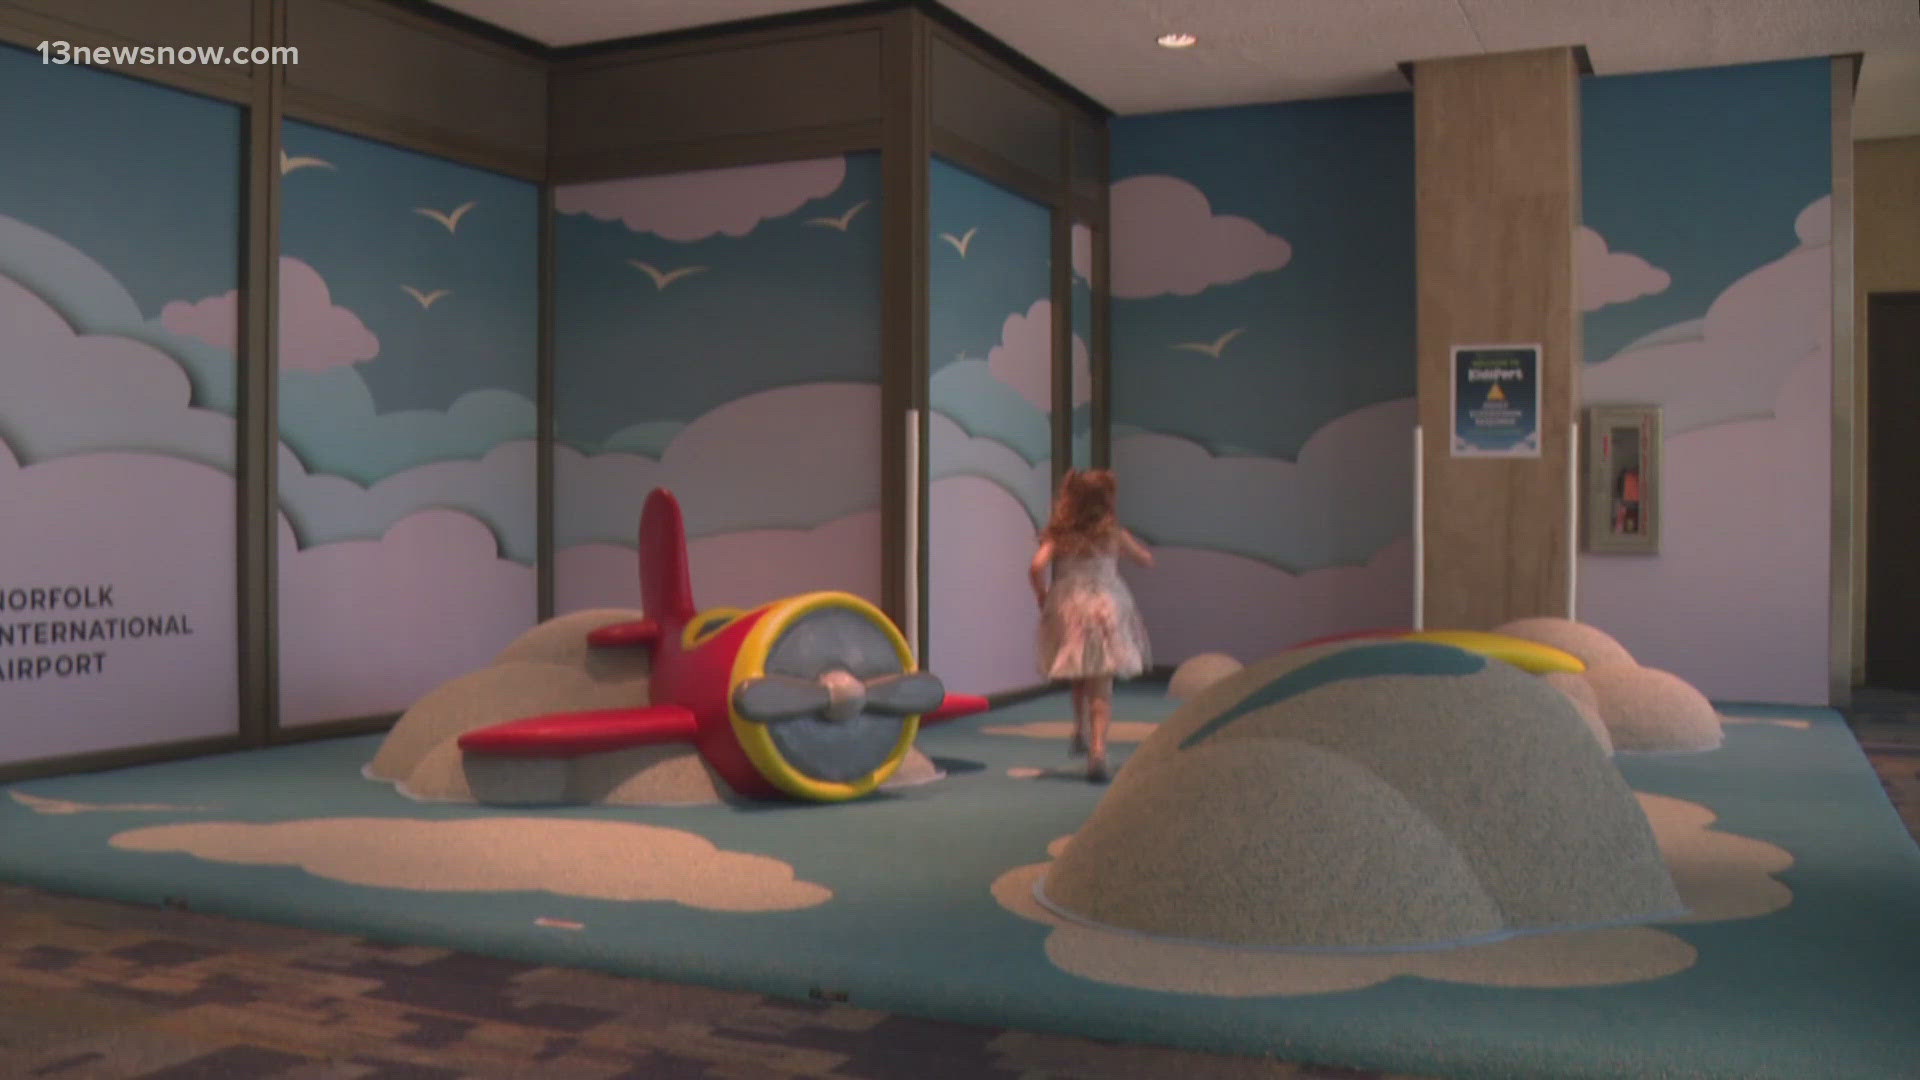 Today, Norfolk International Airport joined that list of airports that feature a fun and engaging airport play area.